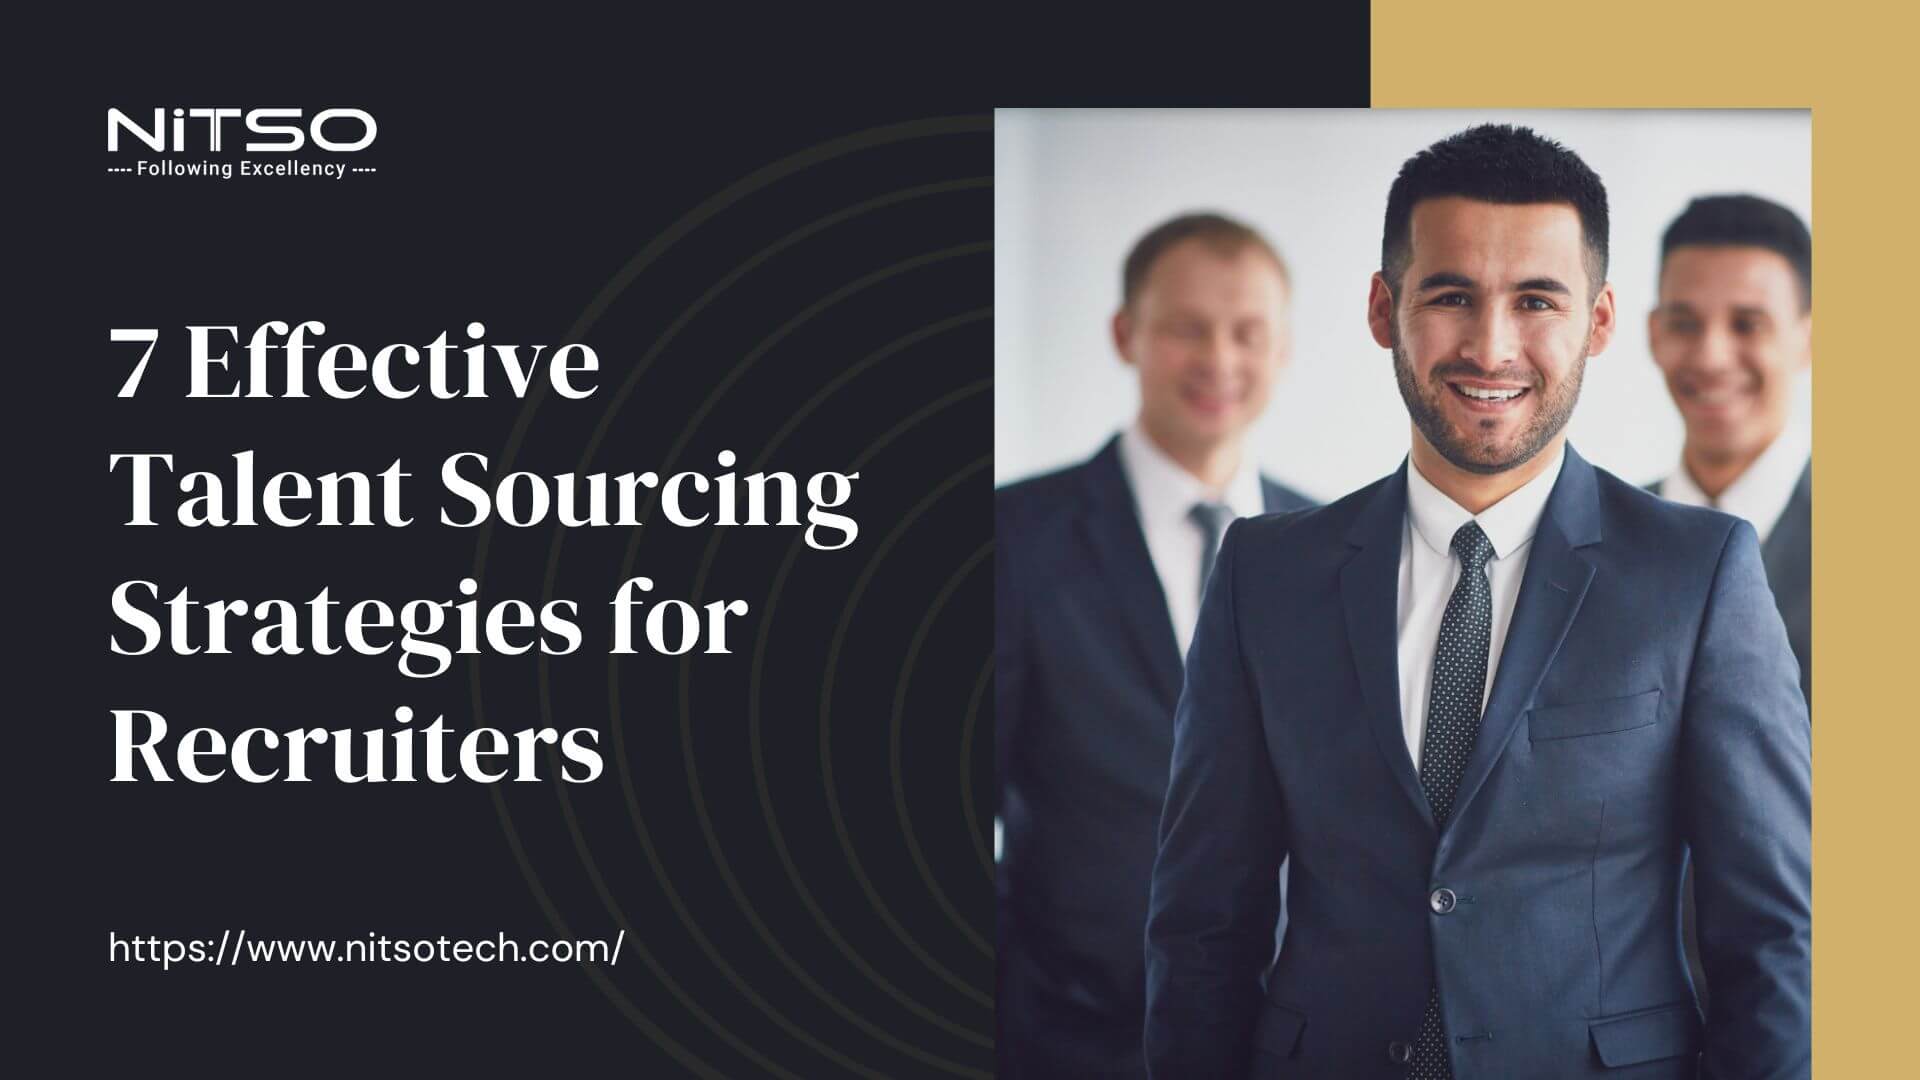 Talent Sourcing Strategy: A Guide for Recruiters